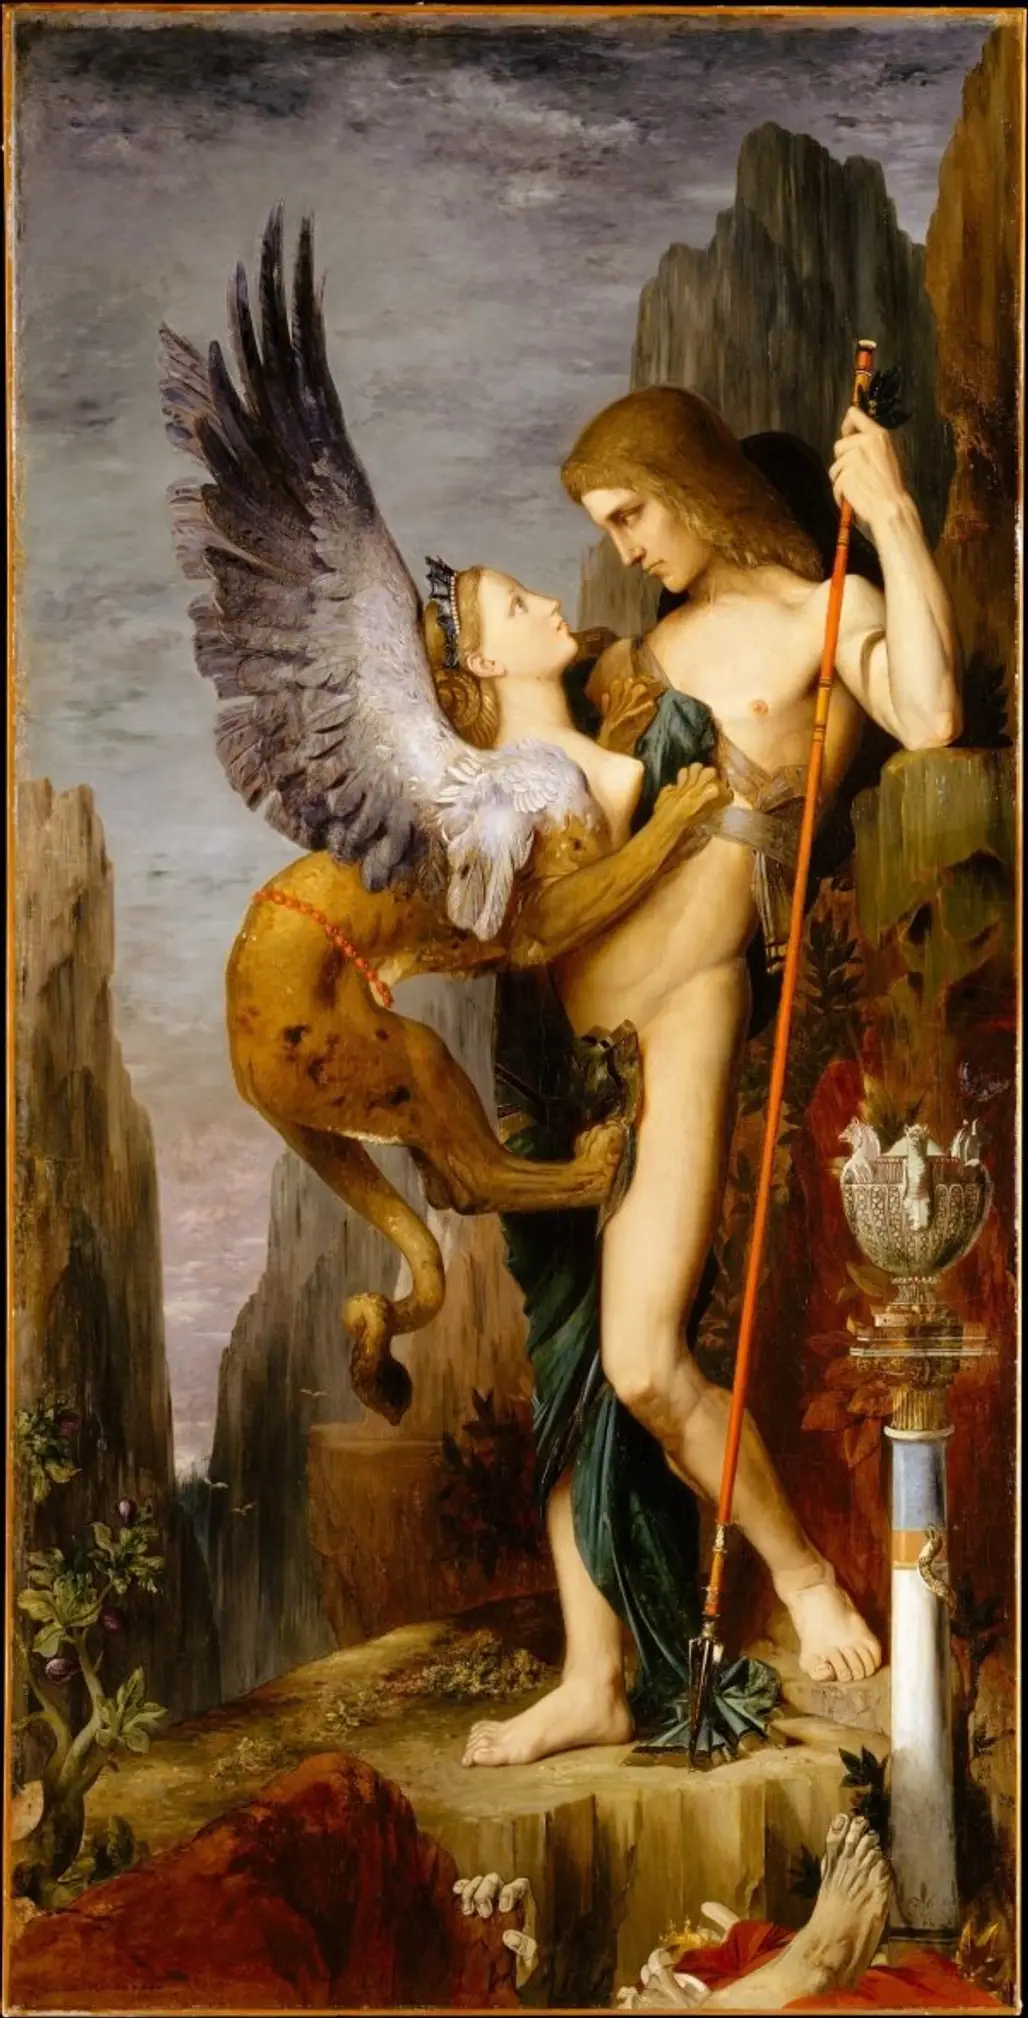 “Oedipus with the Sphinx” by Gustave Moreau